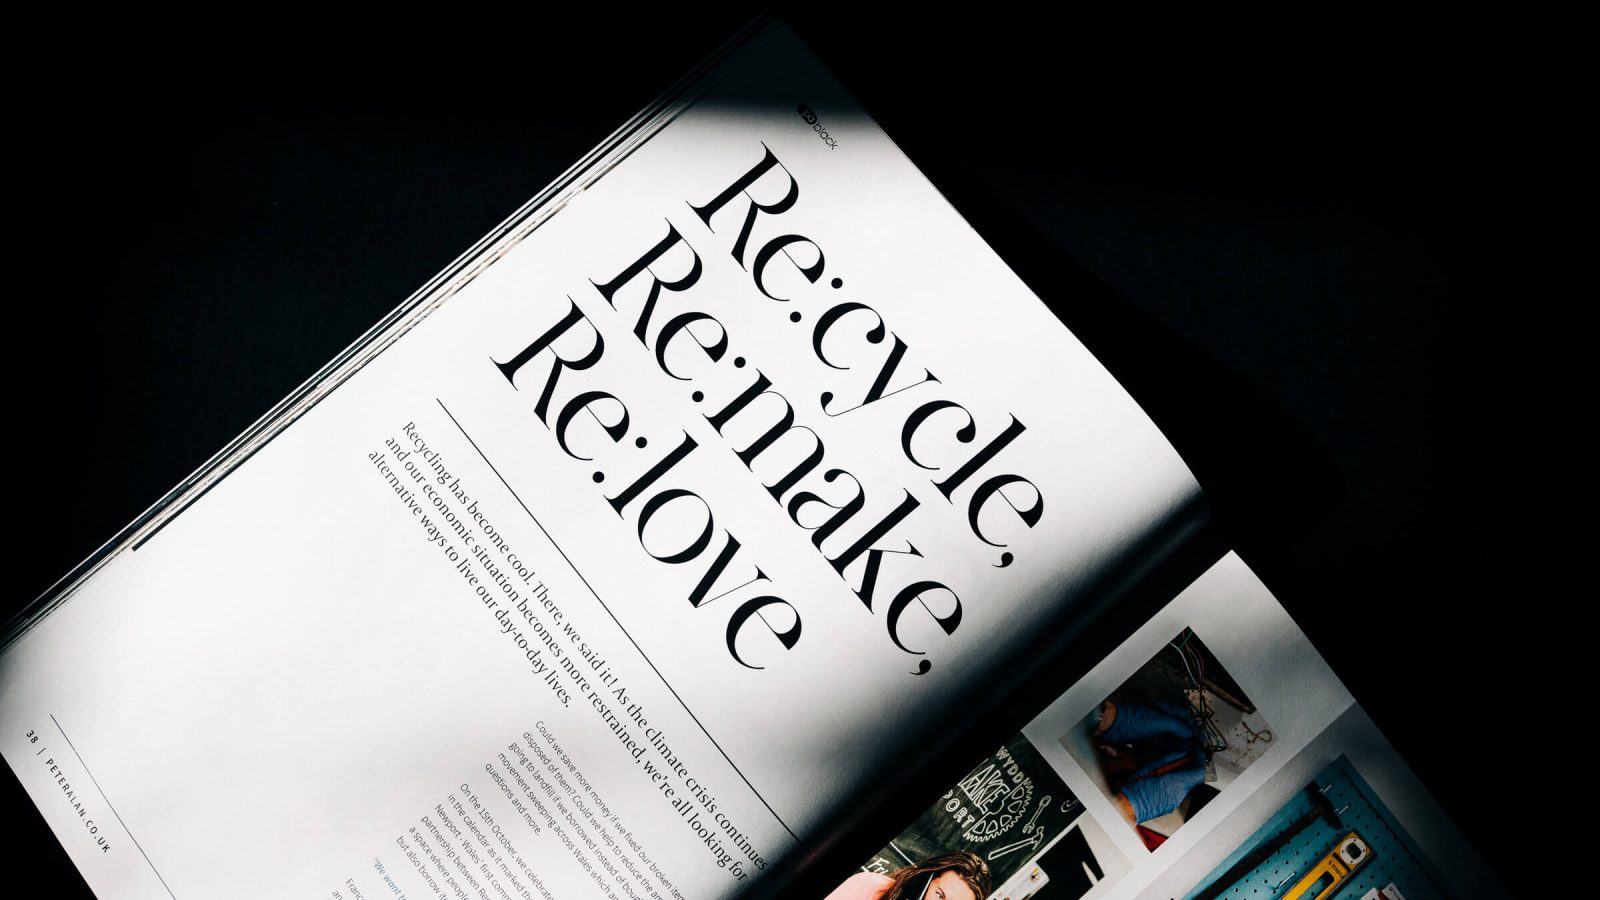 A magazine page open on a dark surface, prominently displaying the words 